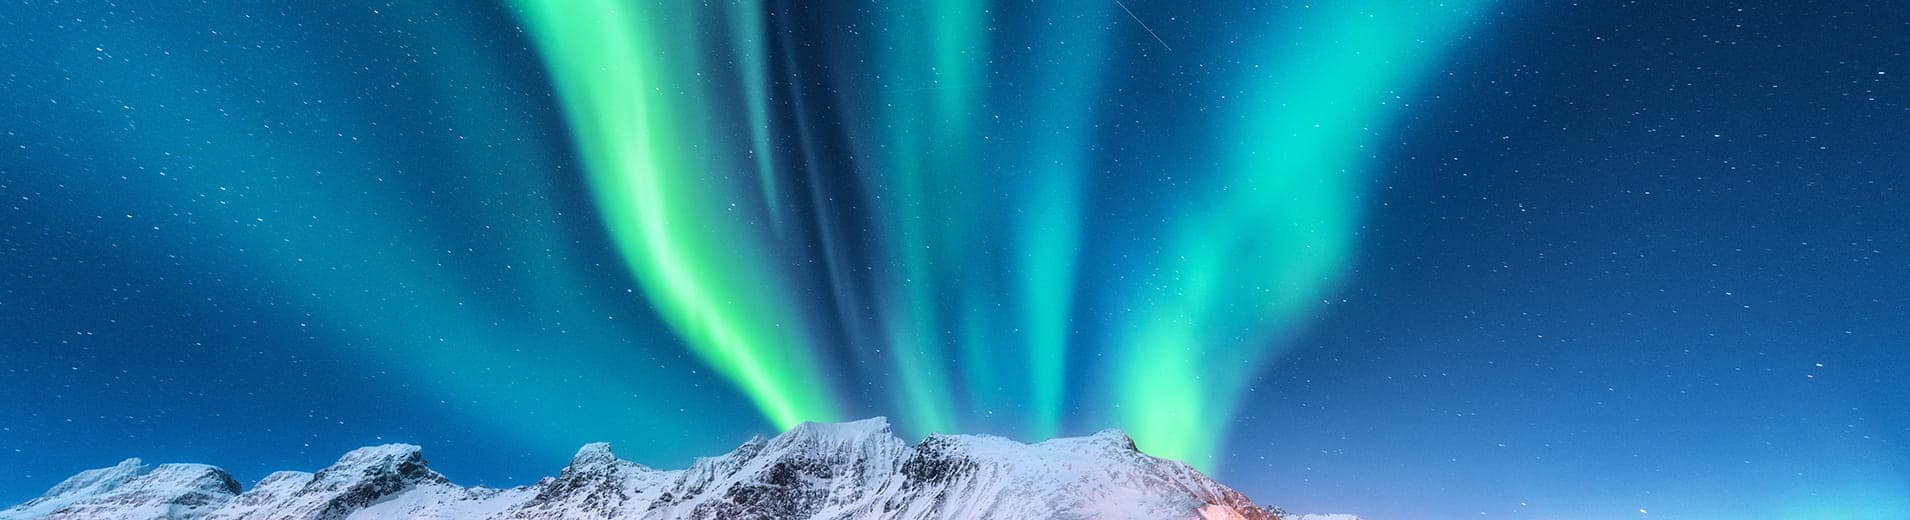 Northern_Lights_Mountains_S_0404